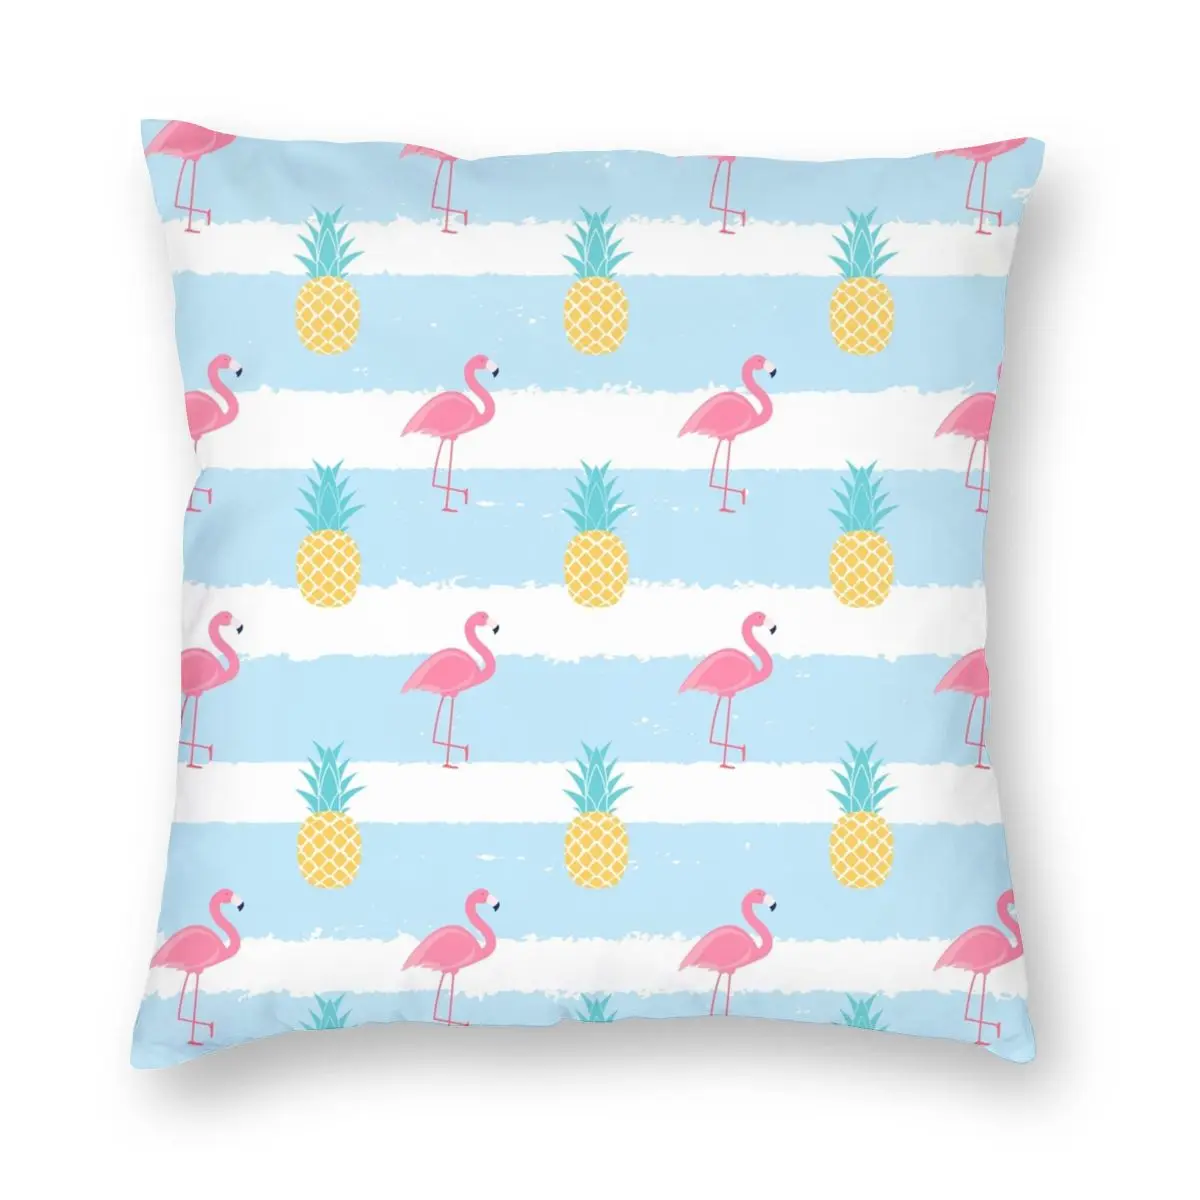 

Pineapple And Flamingo Pillowcase Printing Polyester Cushion Cover Decorative Pink Bird Pillow Case Cover Home Square 45X45cm